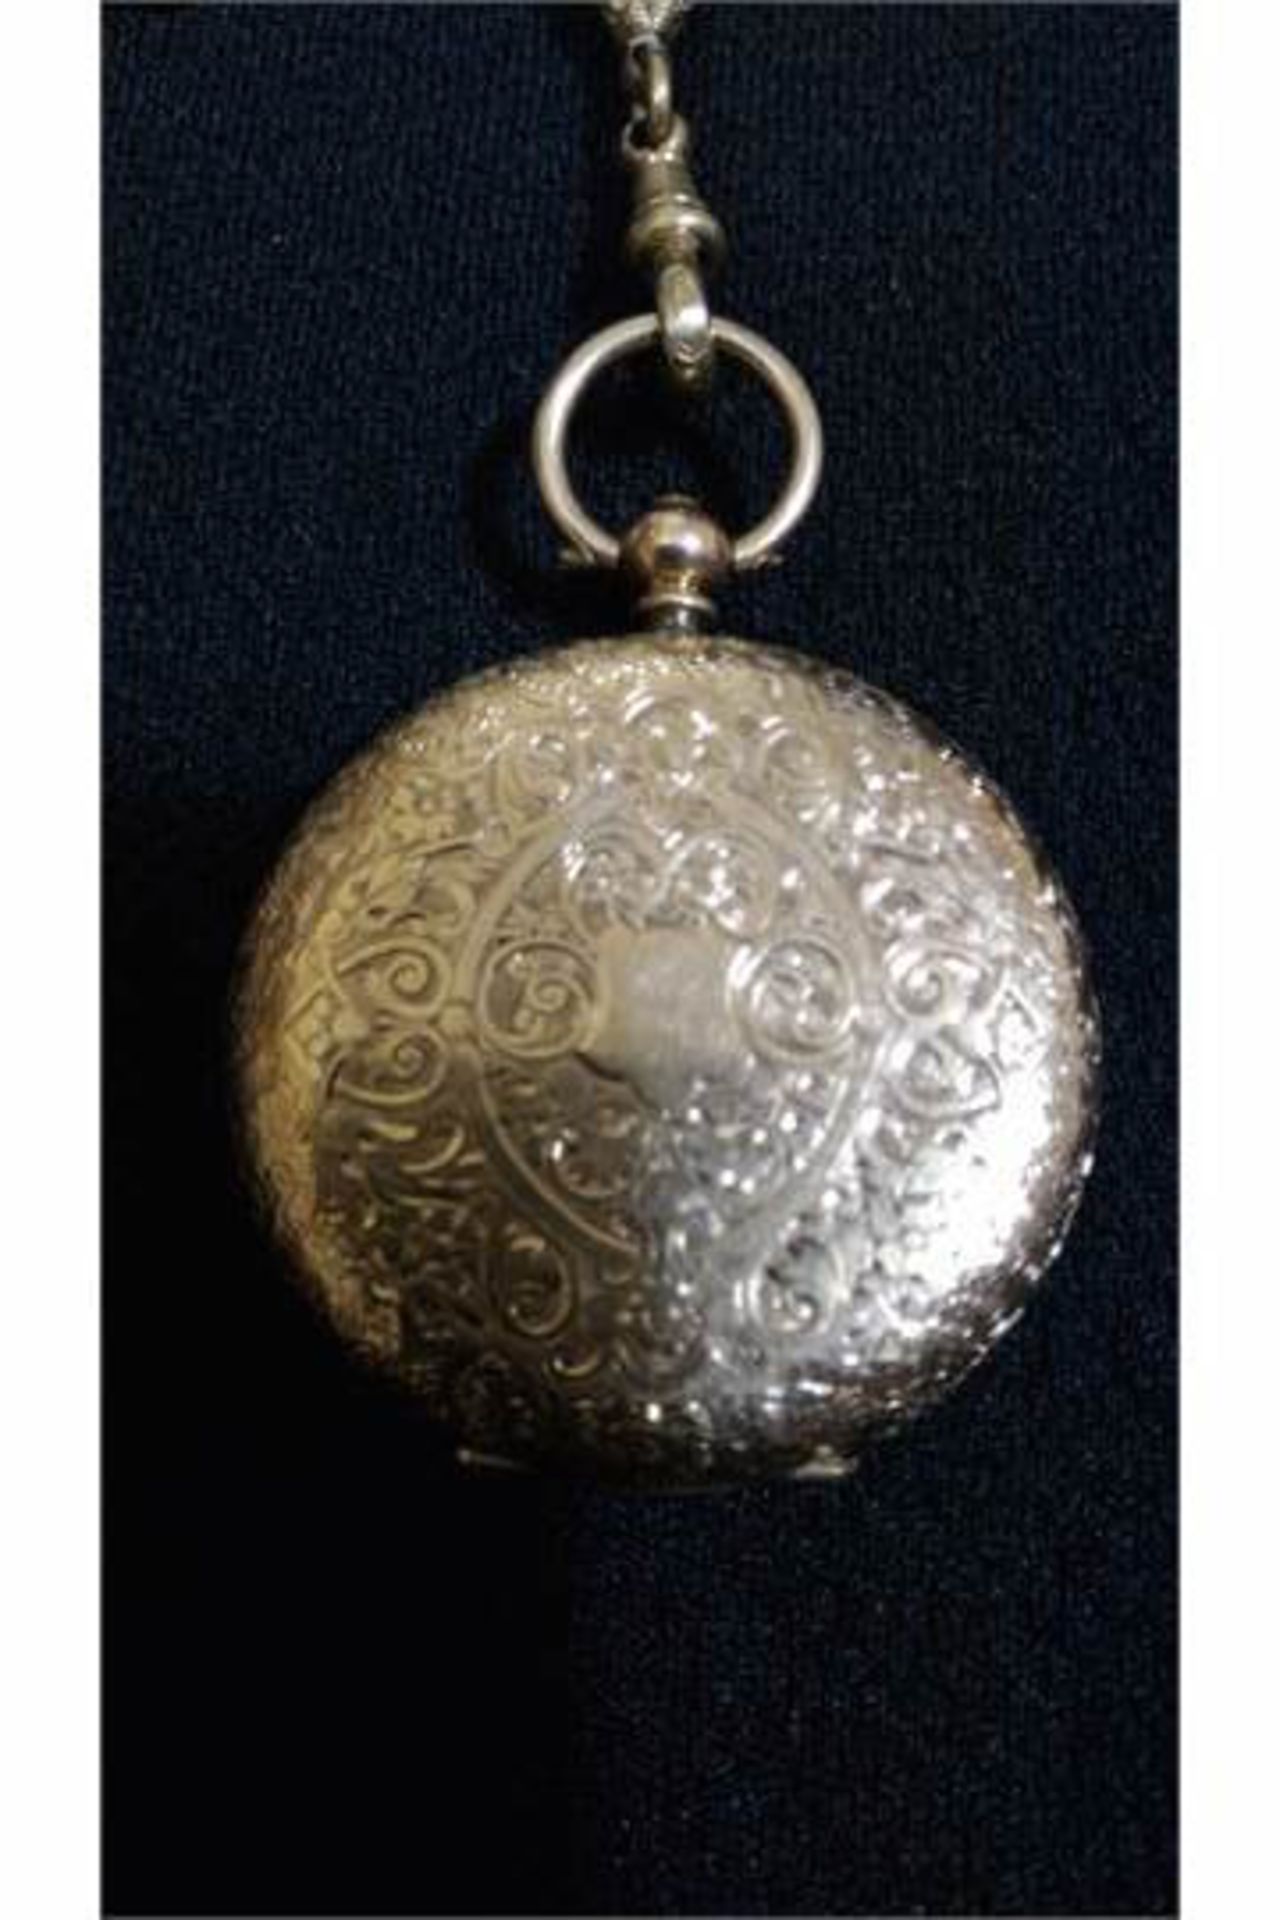 14 ct Cuivre pocket watch with yellow metal chain - Image 6 of 9